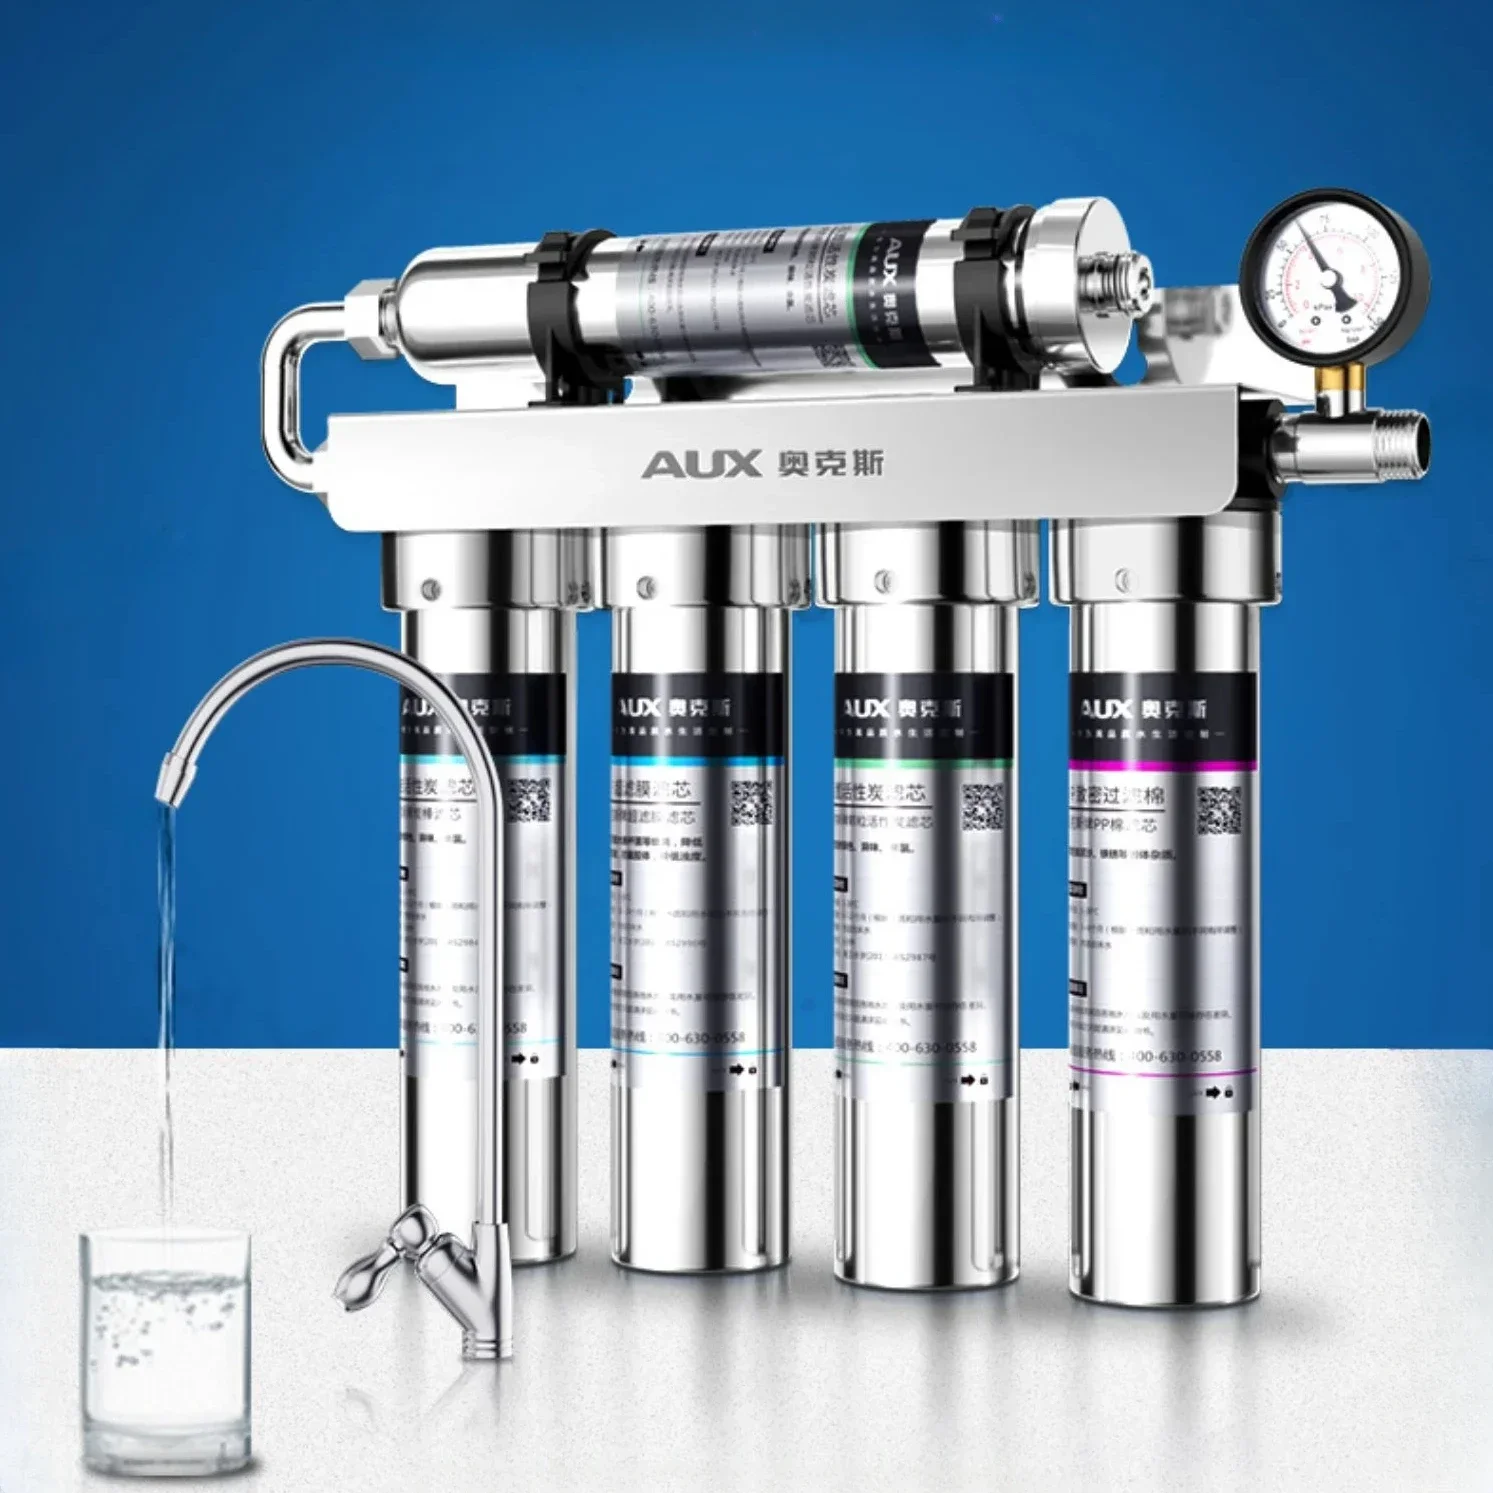 

Oaks Water Purifier Direct Drinking Home Tap Water Ultrafiltration and Commercial New Purification Kitchen Water Purifier